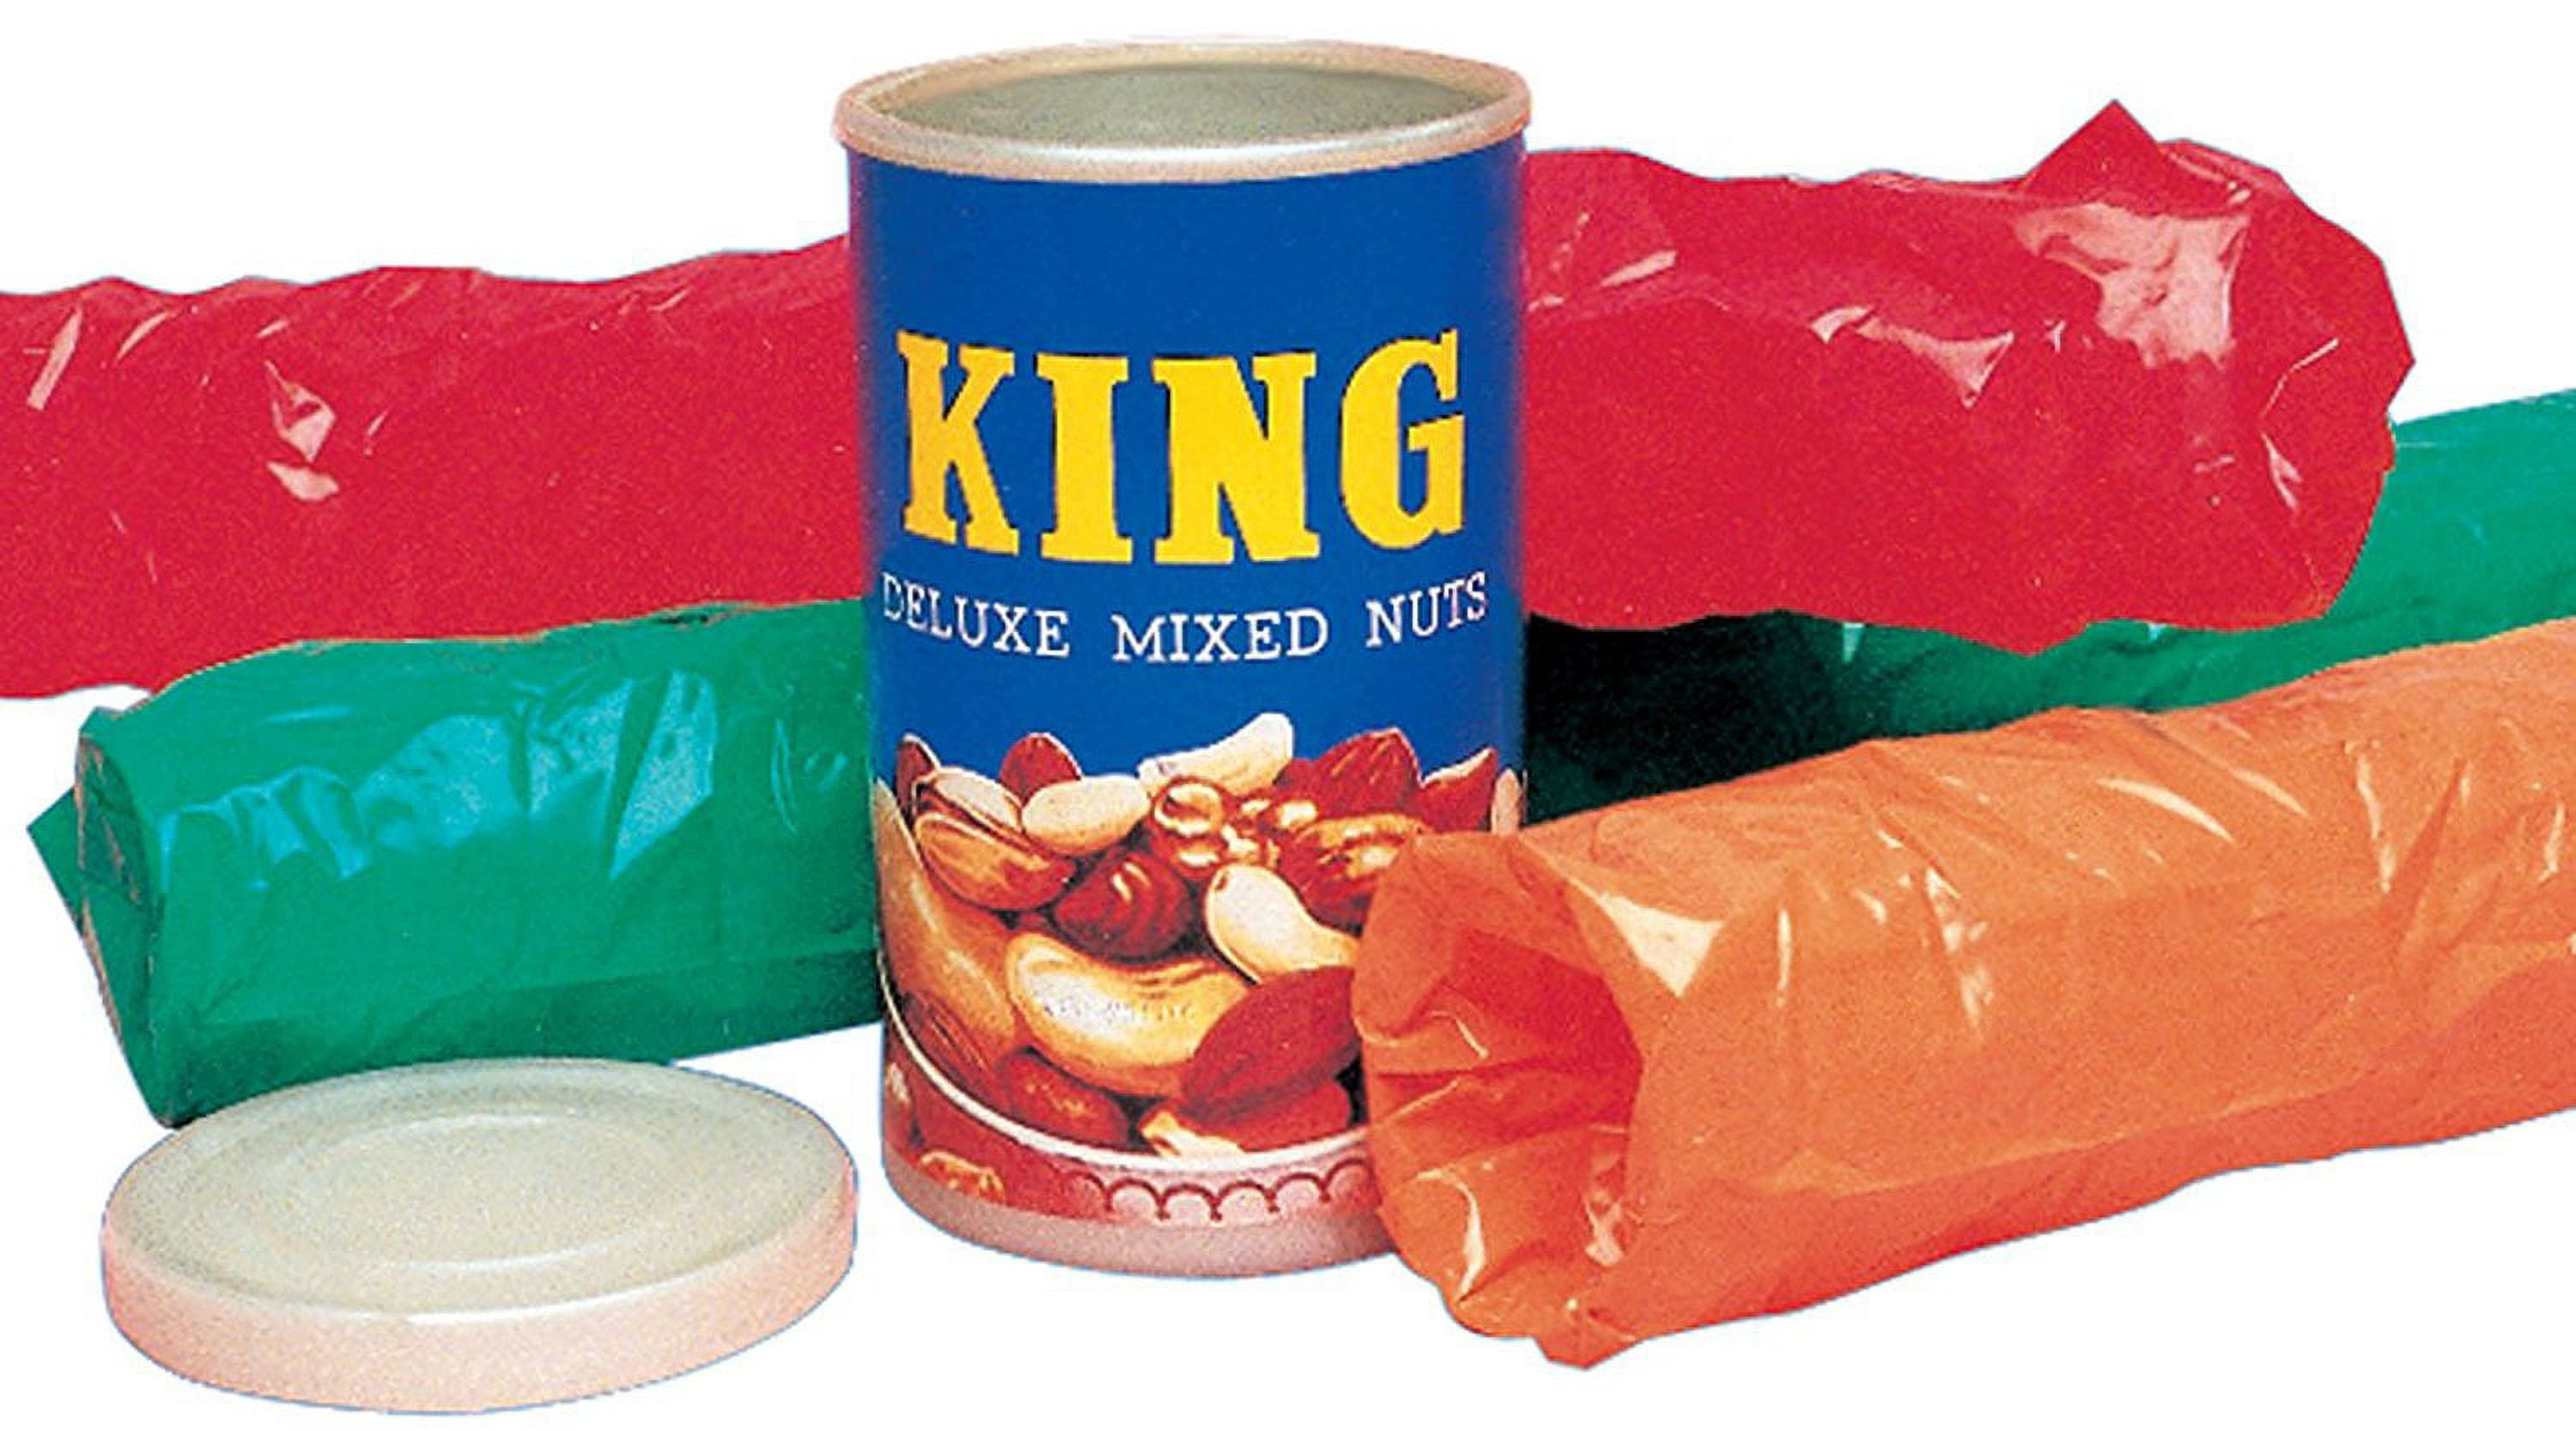 Loftus Three Snakes in a Can - King Deluxe Mixed Nuts Prank 